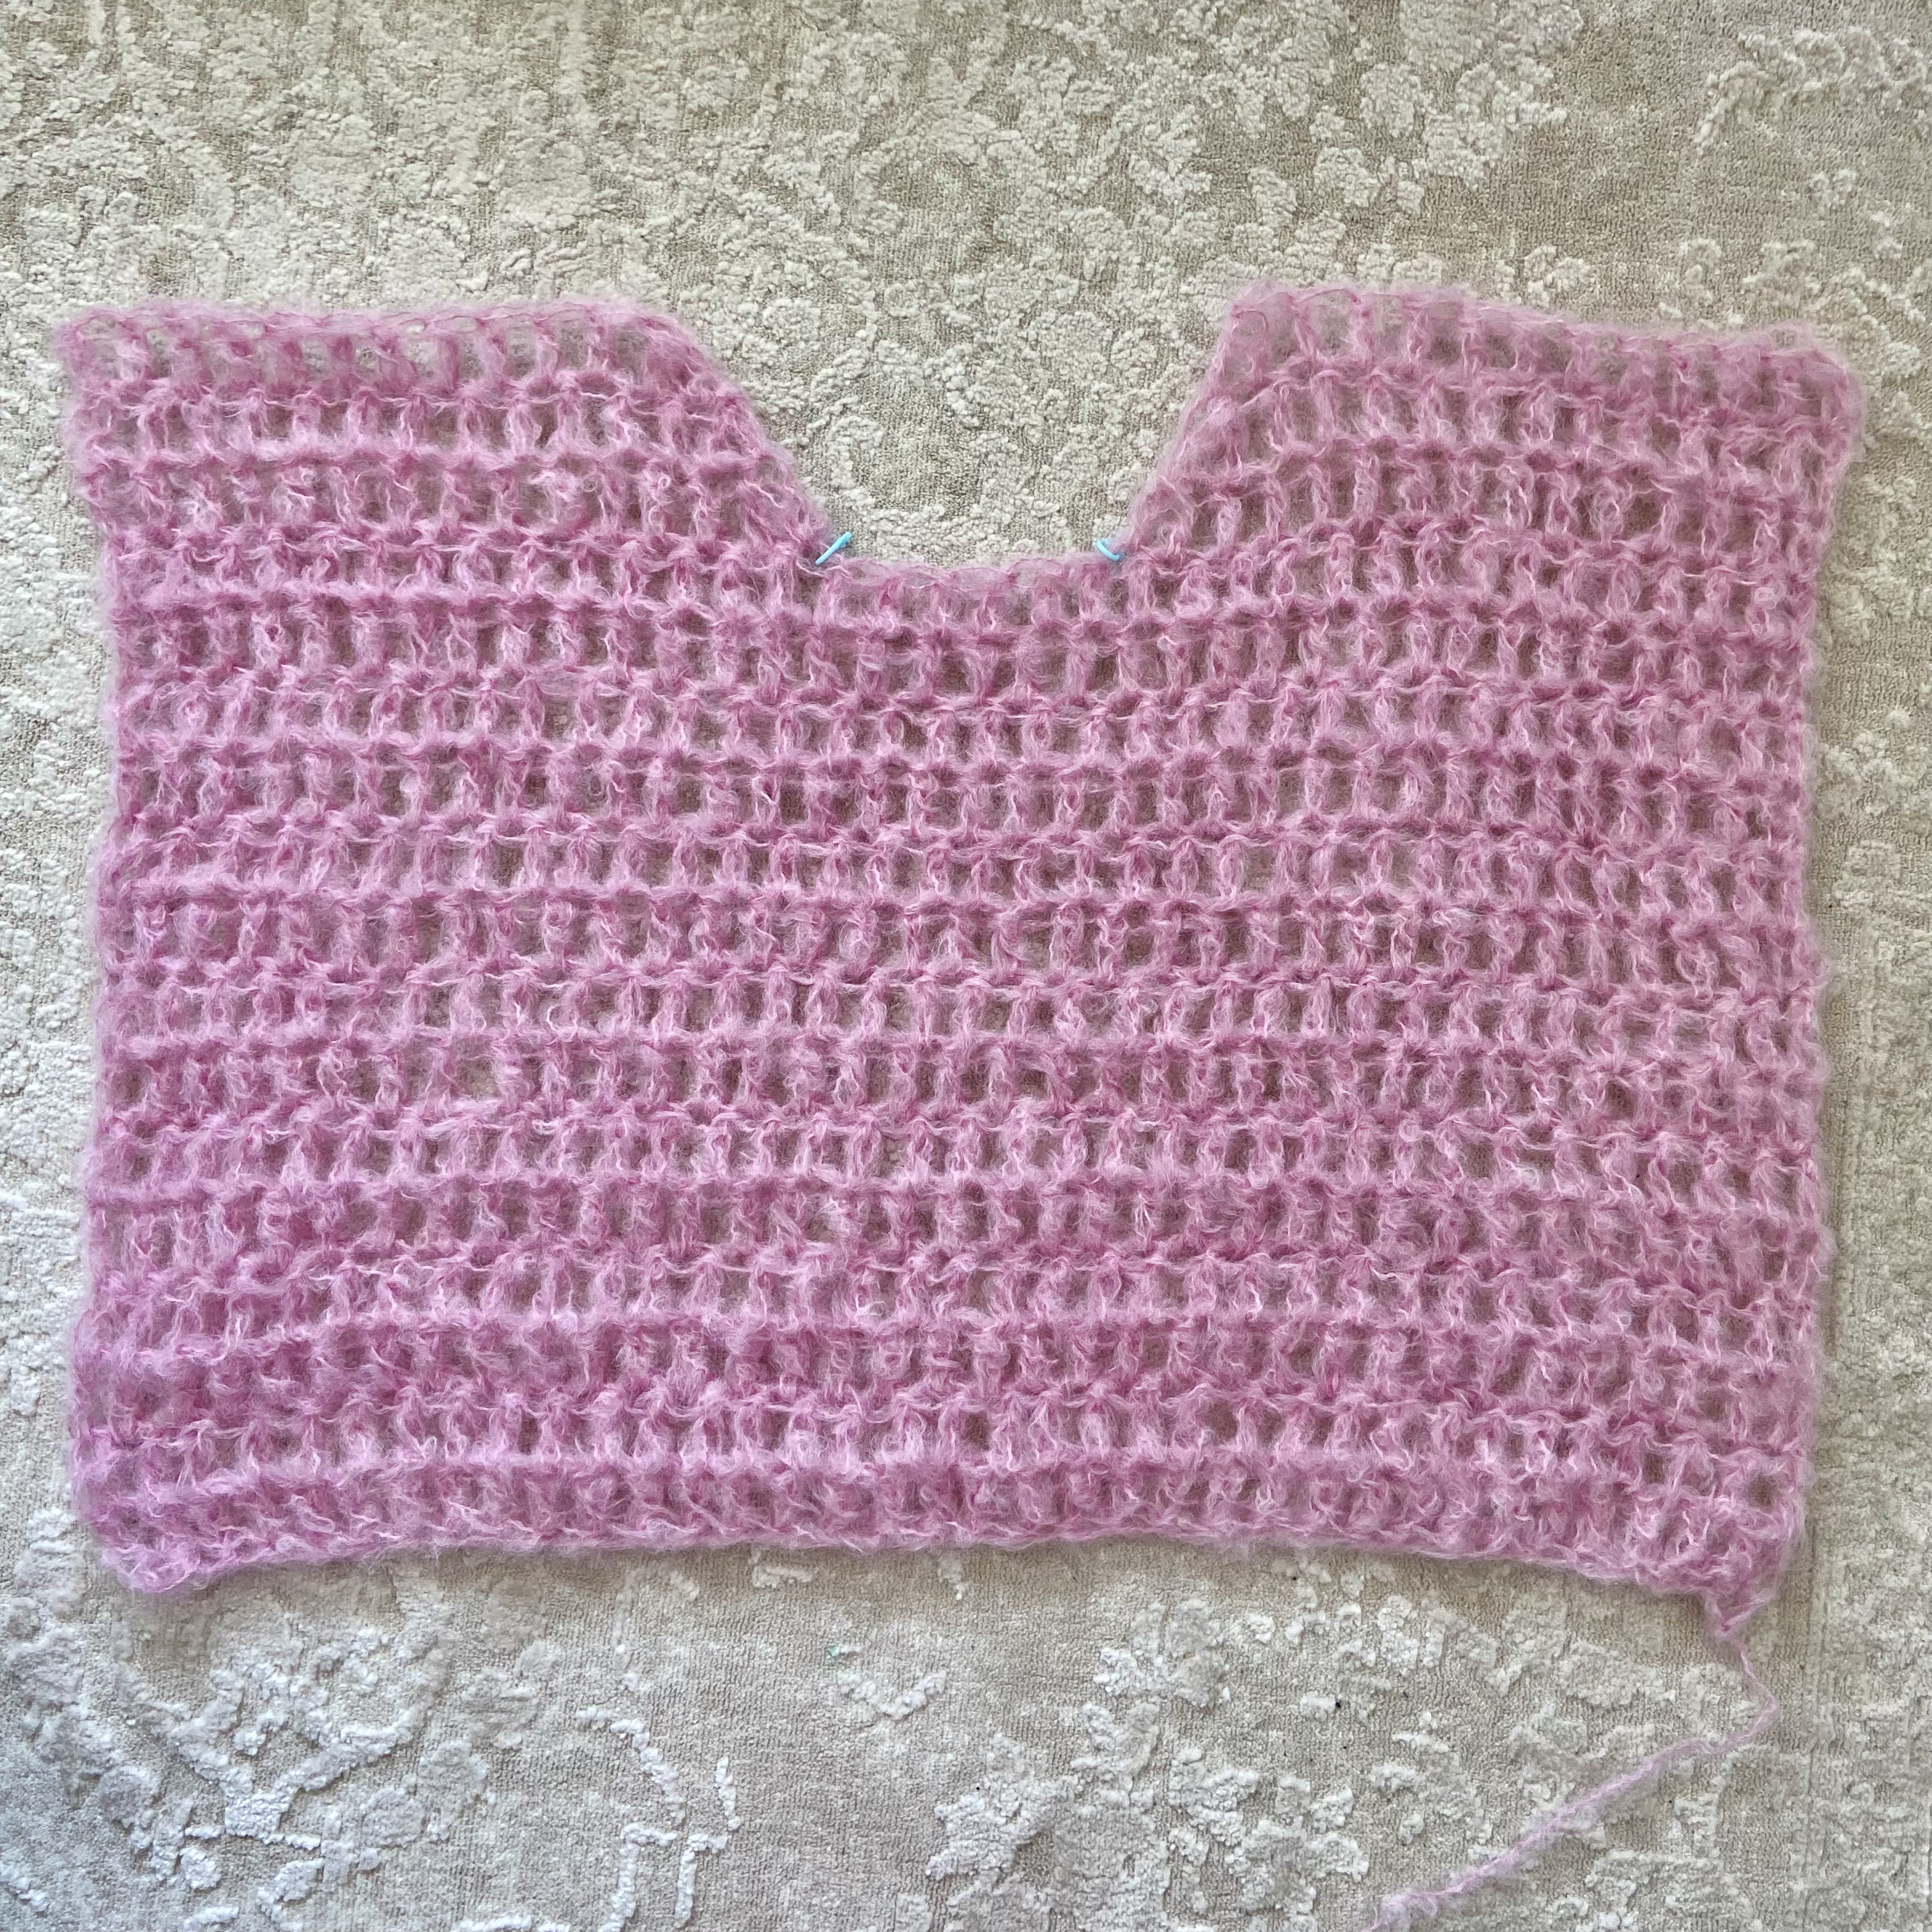 Crochet Square Yoke to Your Desired Size 